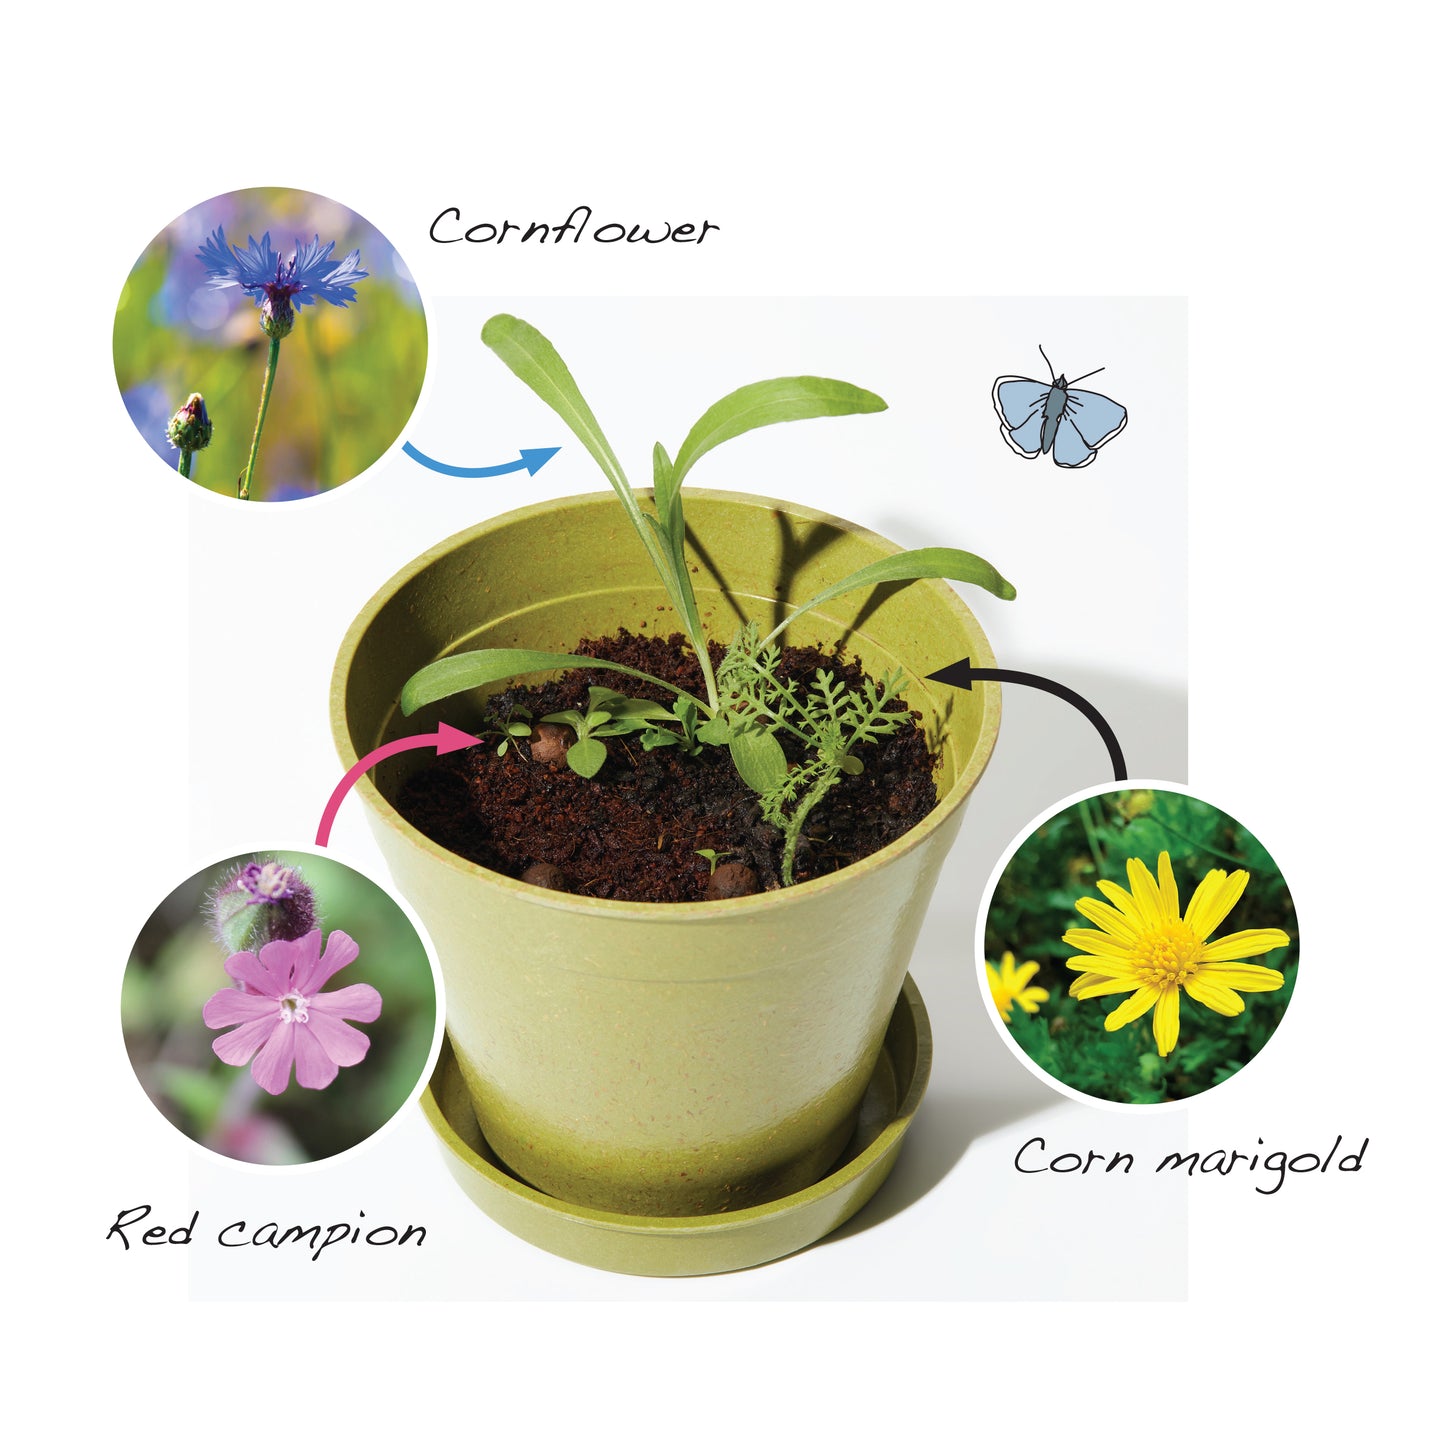 The Every Space Garden Mini-Meadow with 3 biodegradable, compostable bamboo pots and saucers, peat-free coir discs, and 12 wildflower seed balls containing approximately 30 wildlife-friendly wildflower seeds, by Seedball